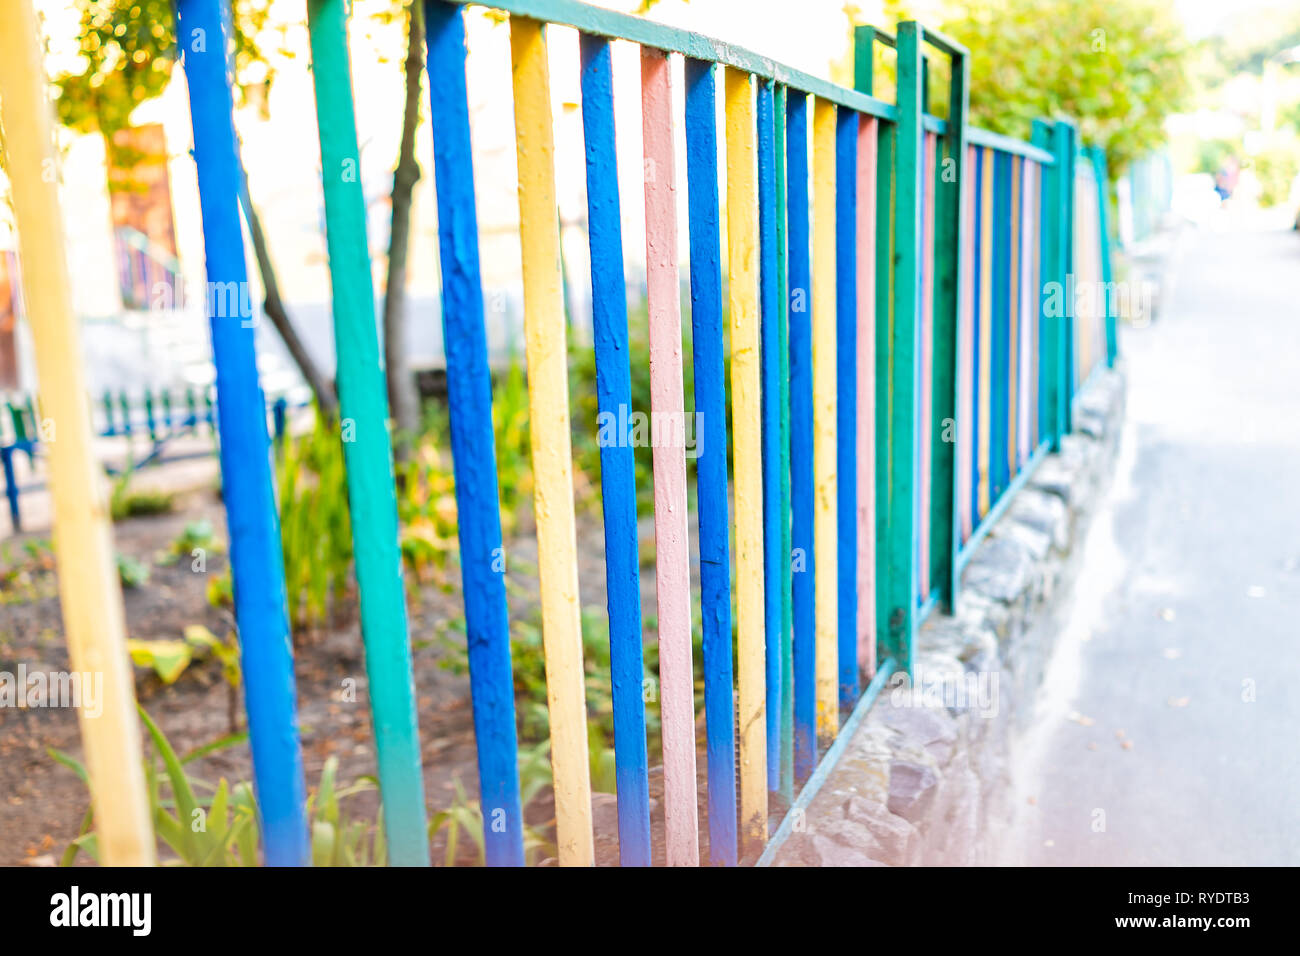 Multicolored rainbow colored blue pink green and yellow bar railing fence on sidewalk in urban city with vibrant colors Stock Photo